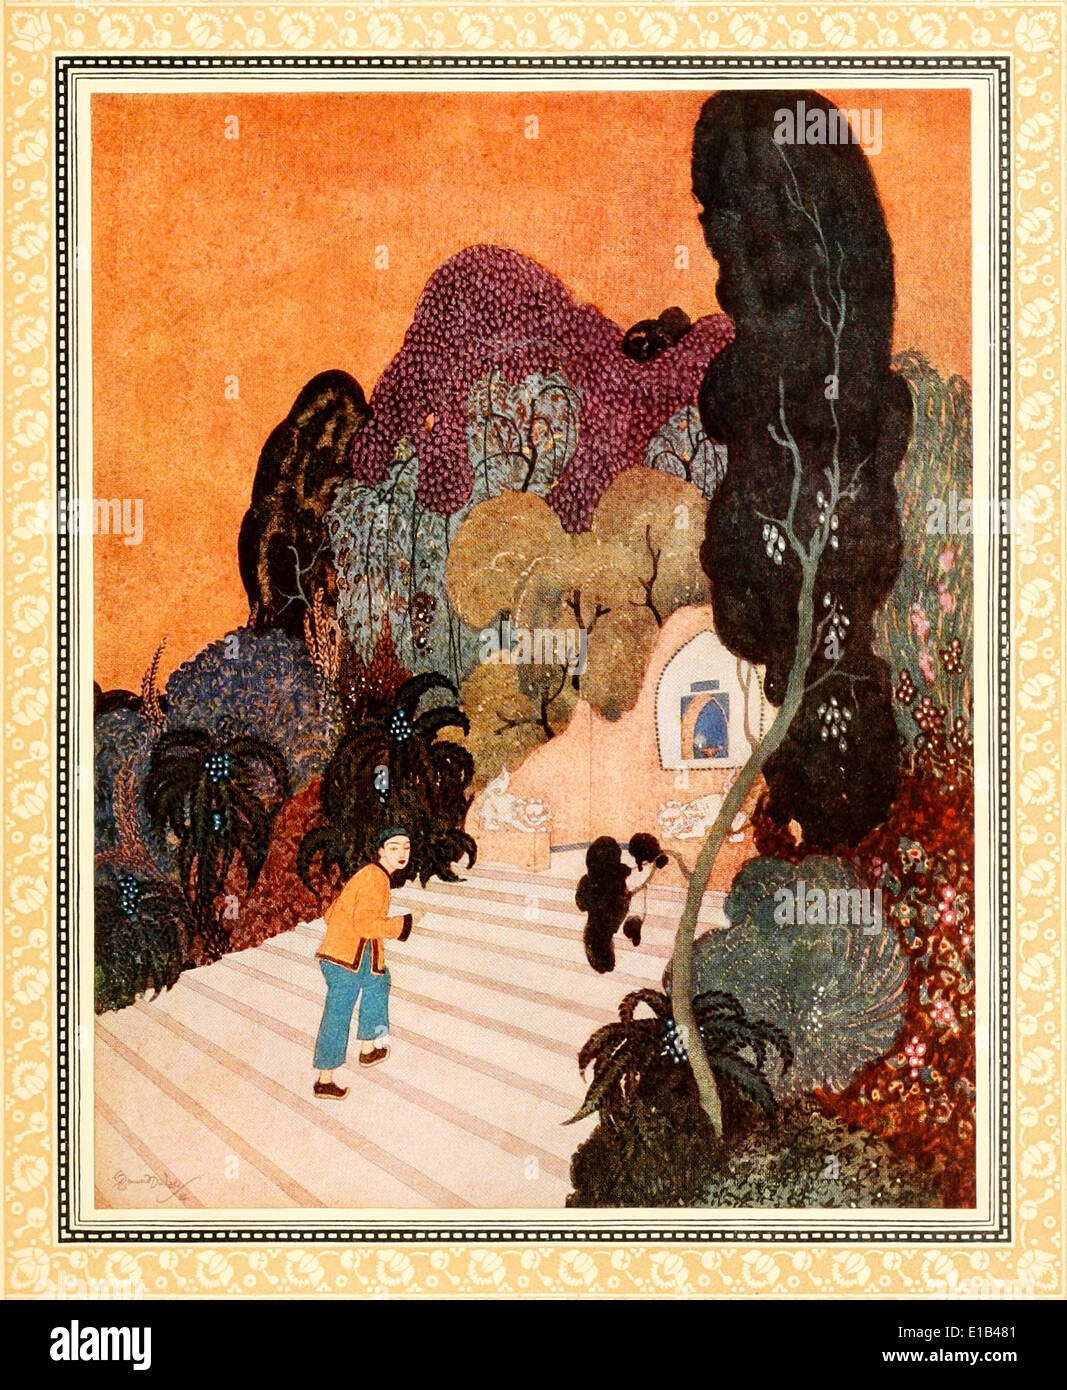 Edmund Dulac (1882-1953) illustration from ‘Sinbad the Sailor & Other Stories from the Arabian Nights’. Aladdin finds the lamp. Stock Photo